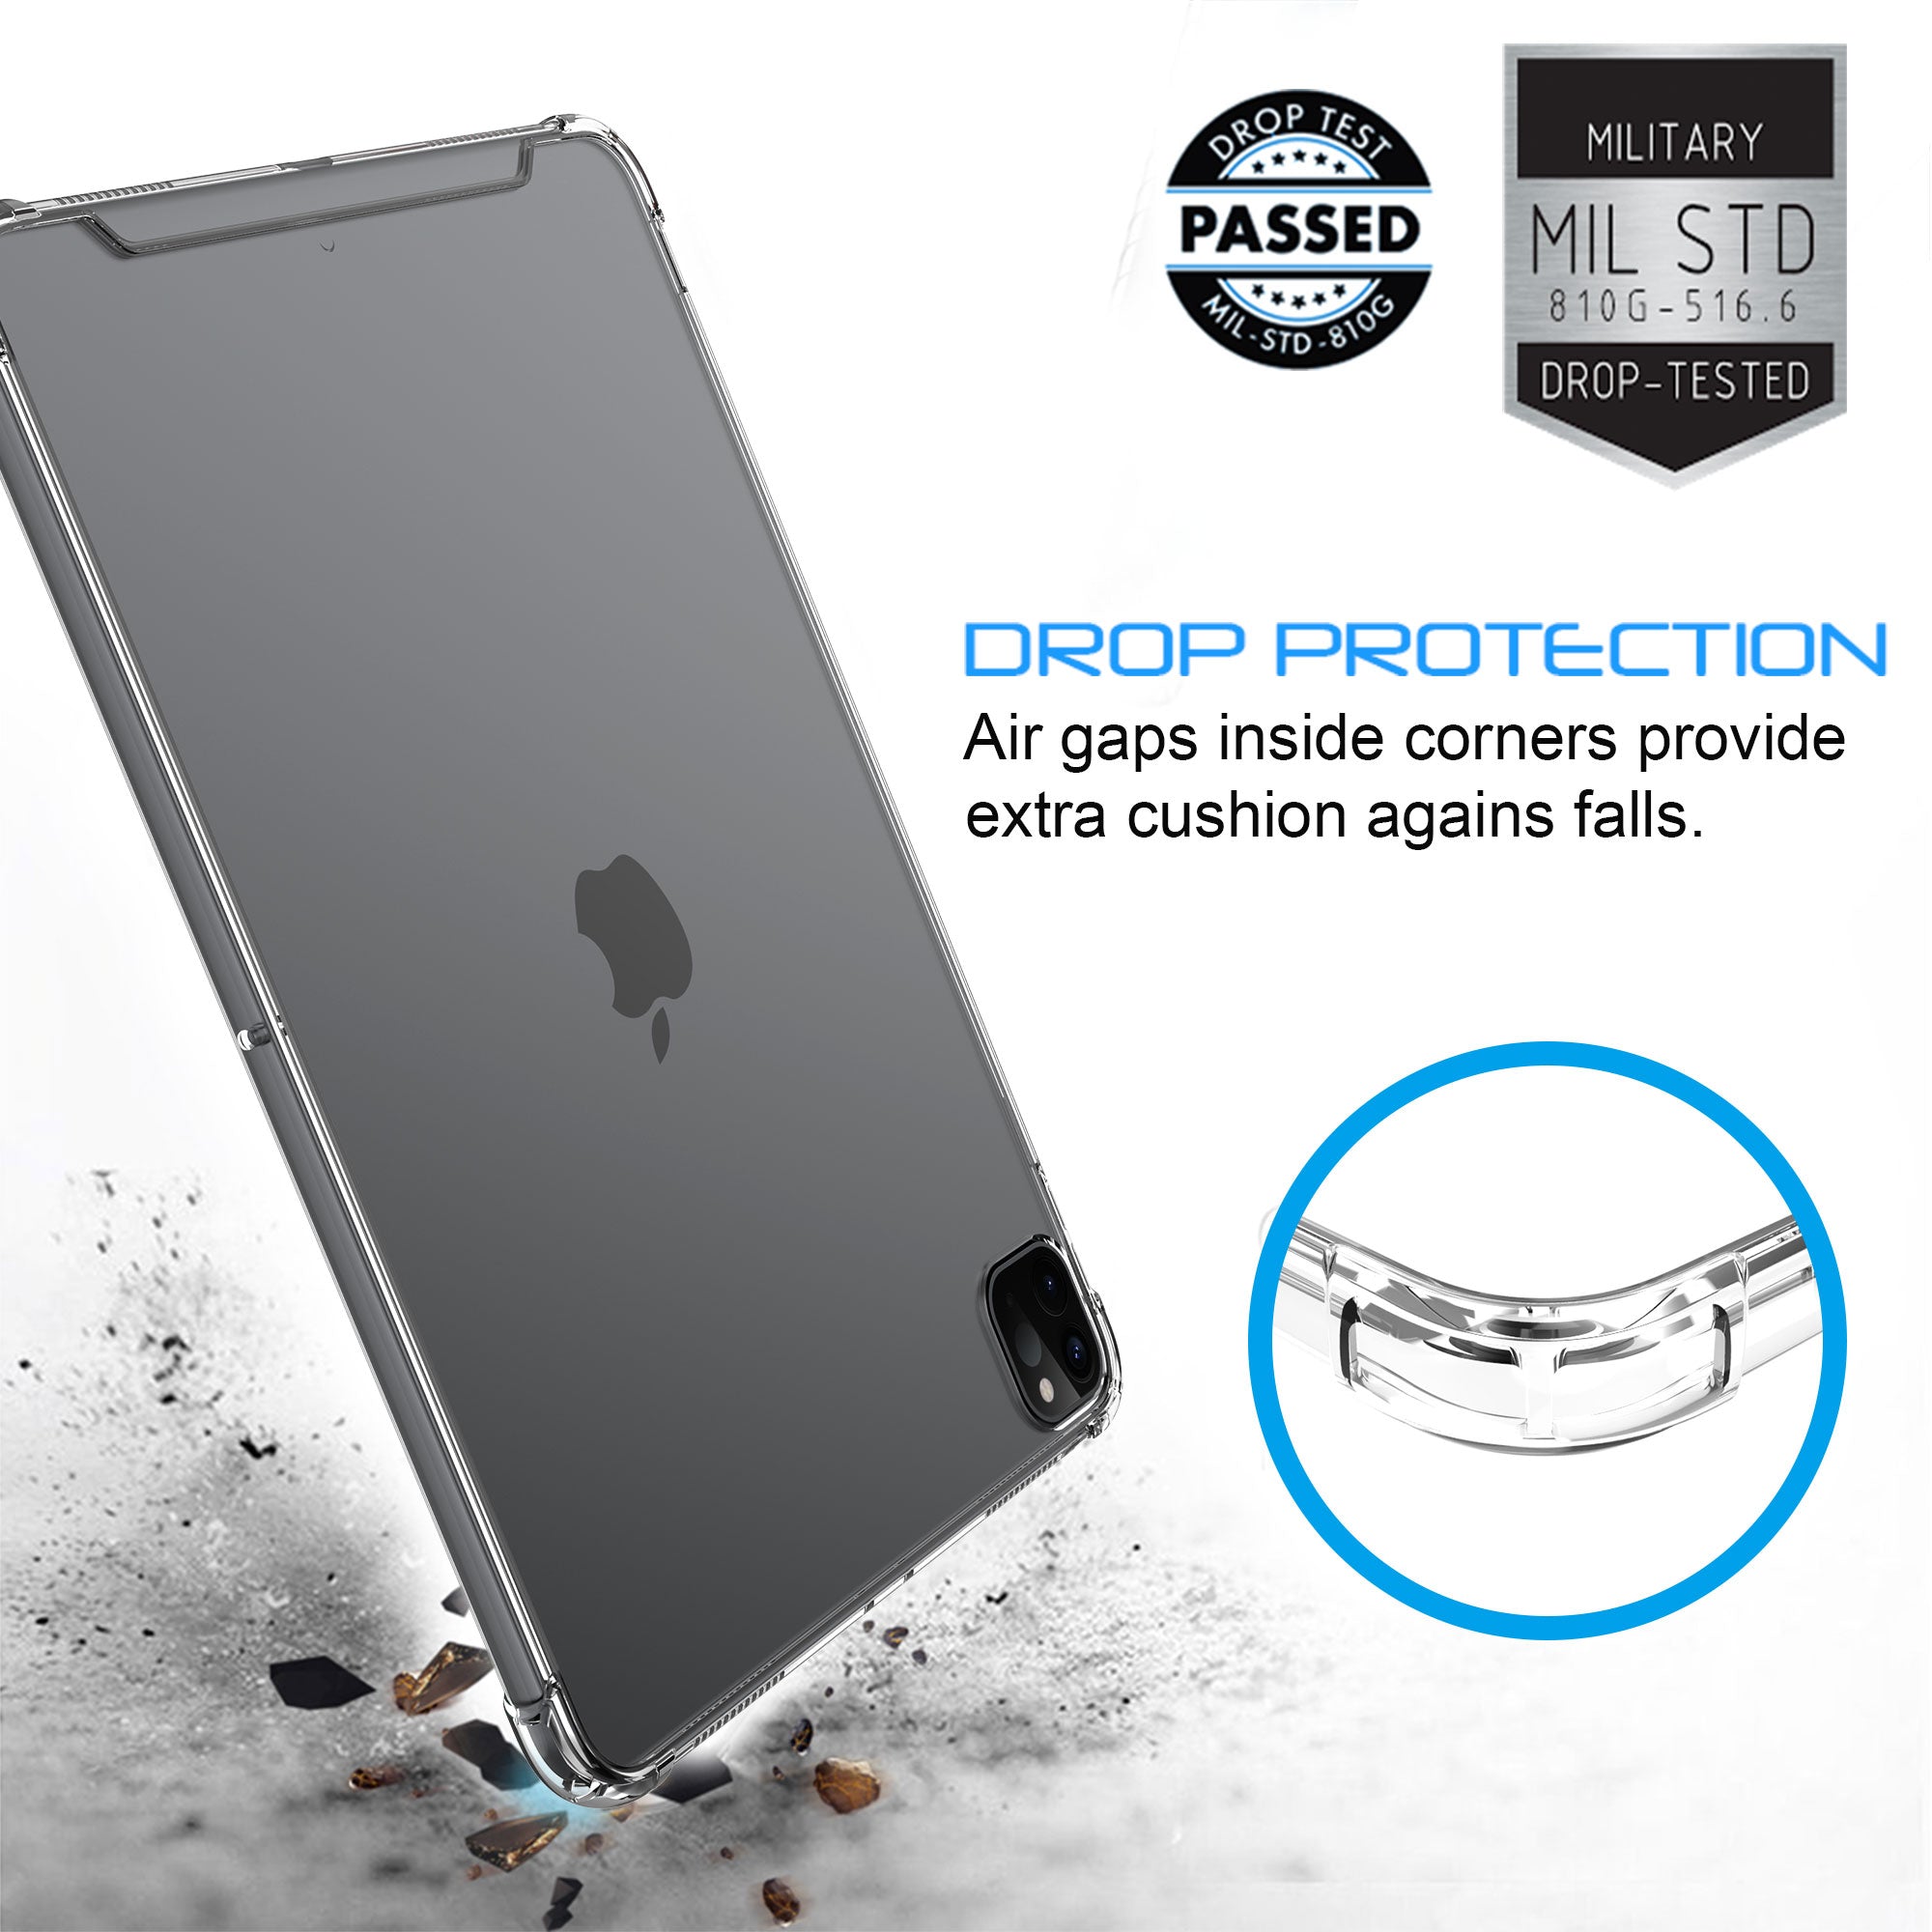 iPad Pro 12.9 2020 Case with $250 Warranty - Luvvitt Clear View Case and Liquid Glass Screen Protector